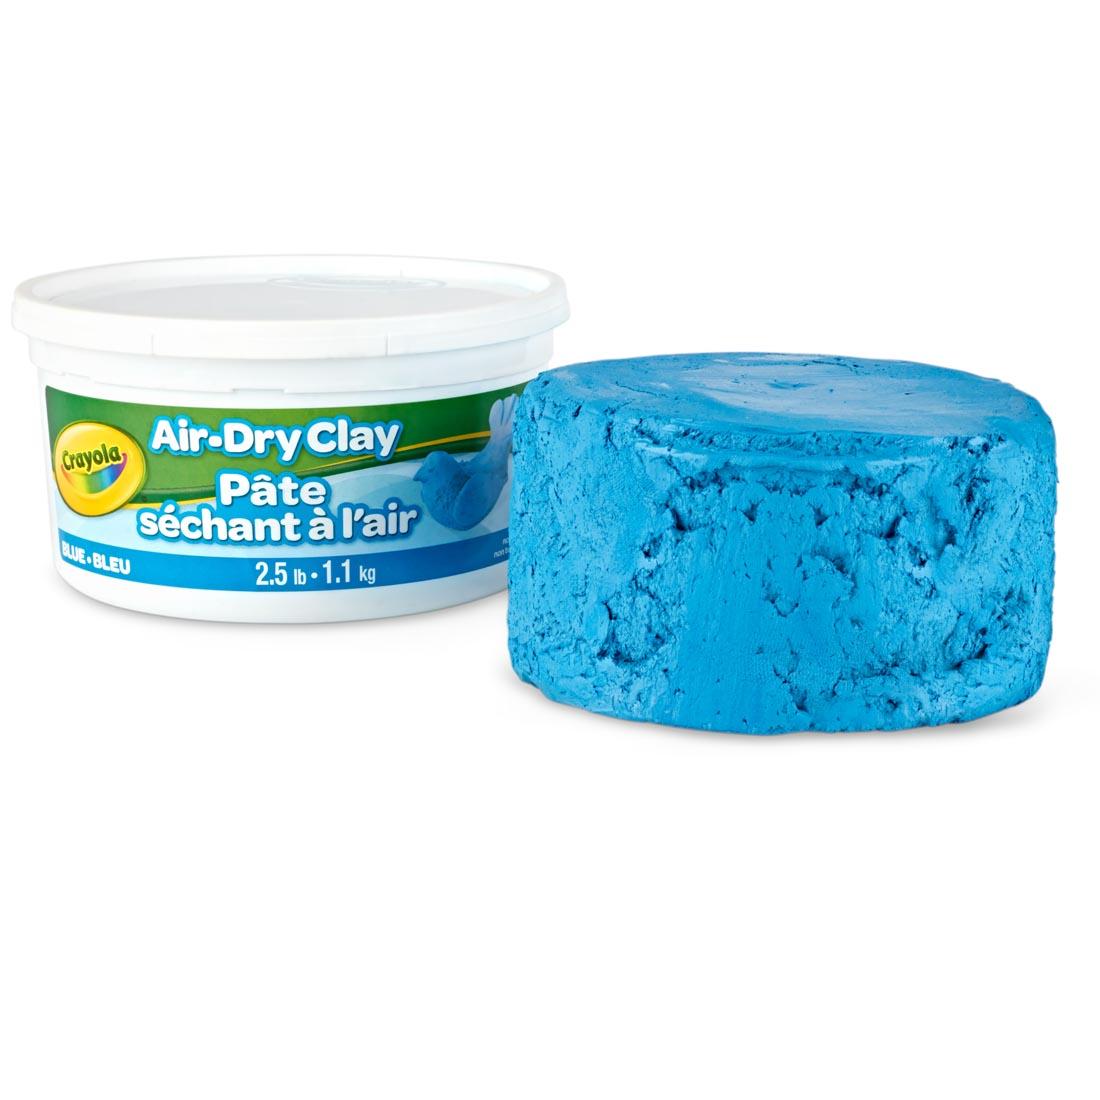 Lump of Blue Crayola Air-Dry Clay beside its container